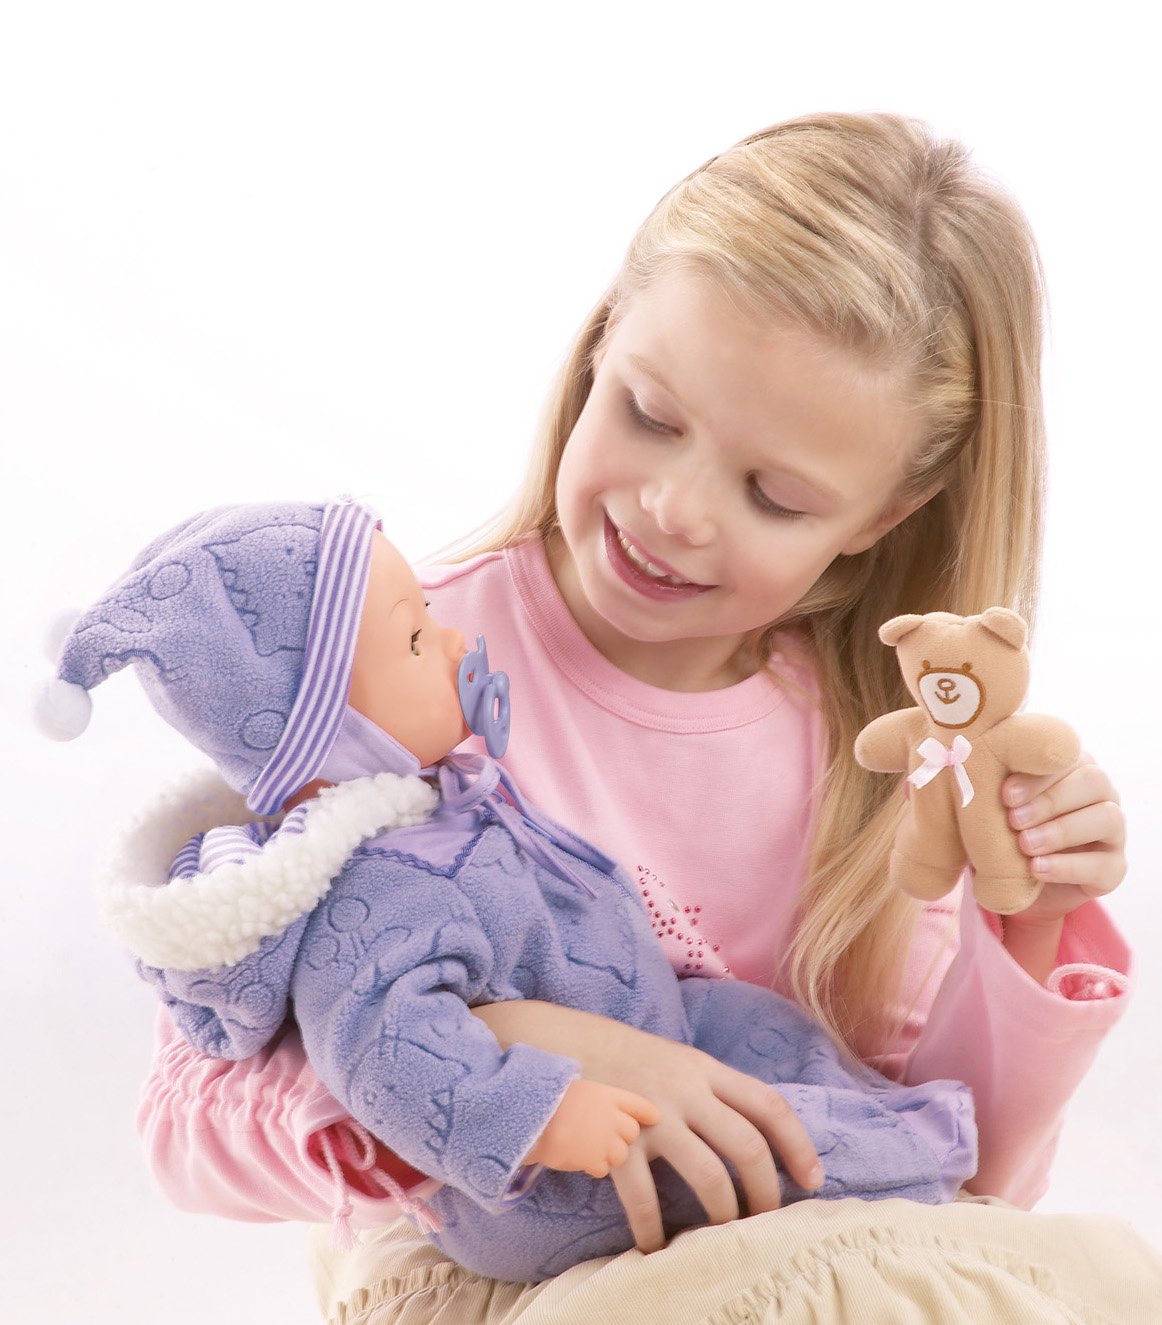 46 – with Doll Bayer Design Piccolina Interactive, Magic cm 94694AA, Accessories TopToy Eyes